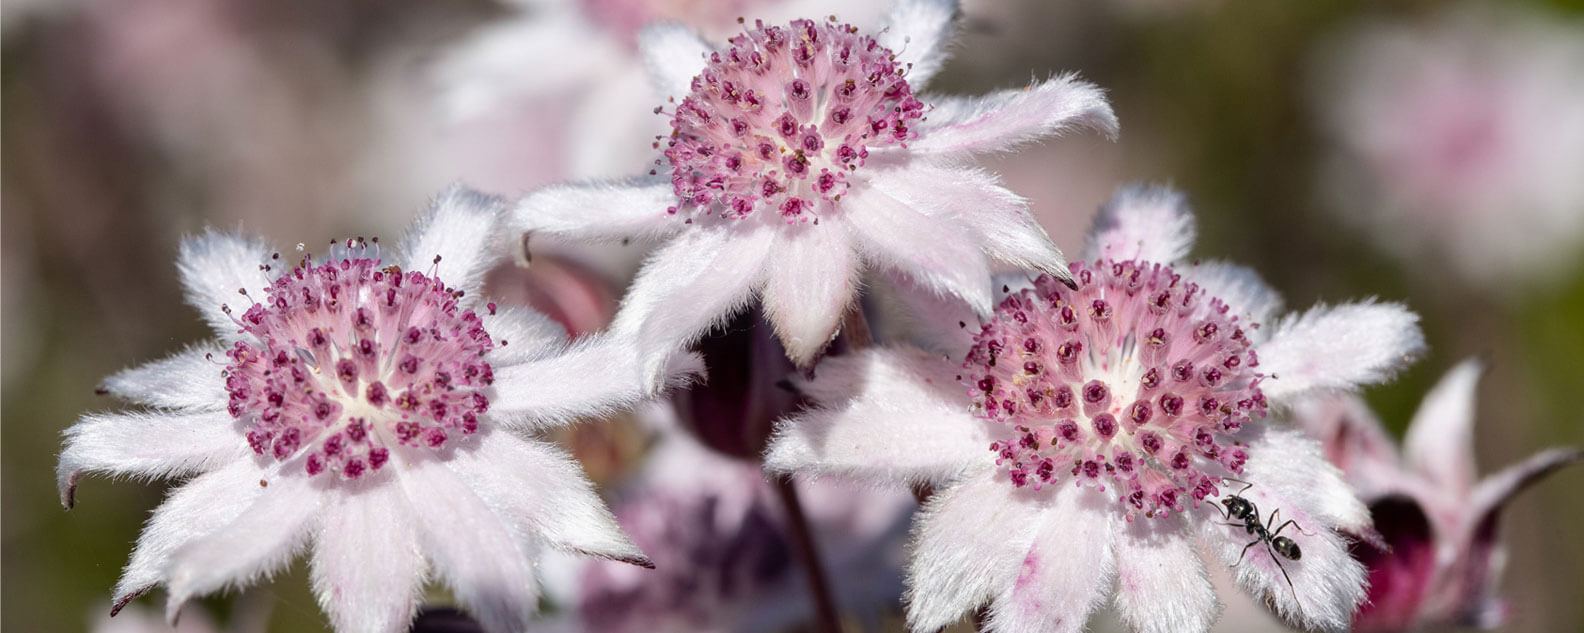 Pink Flannel Flowers